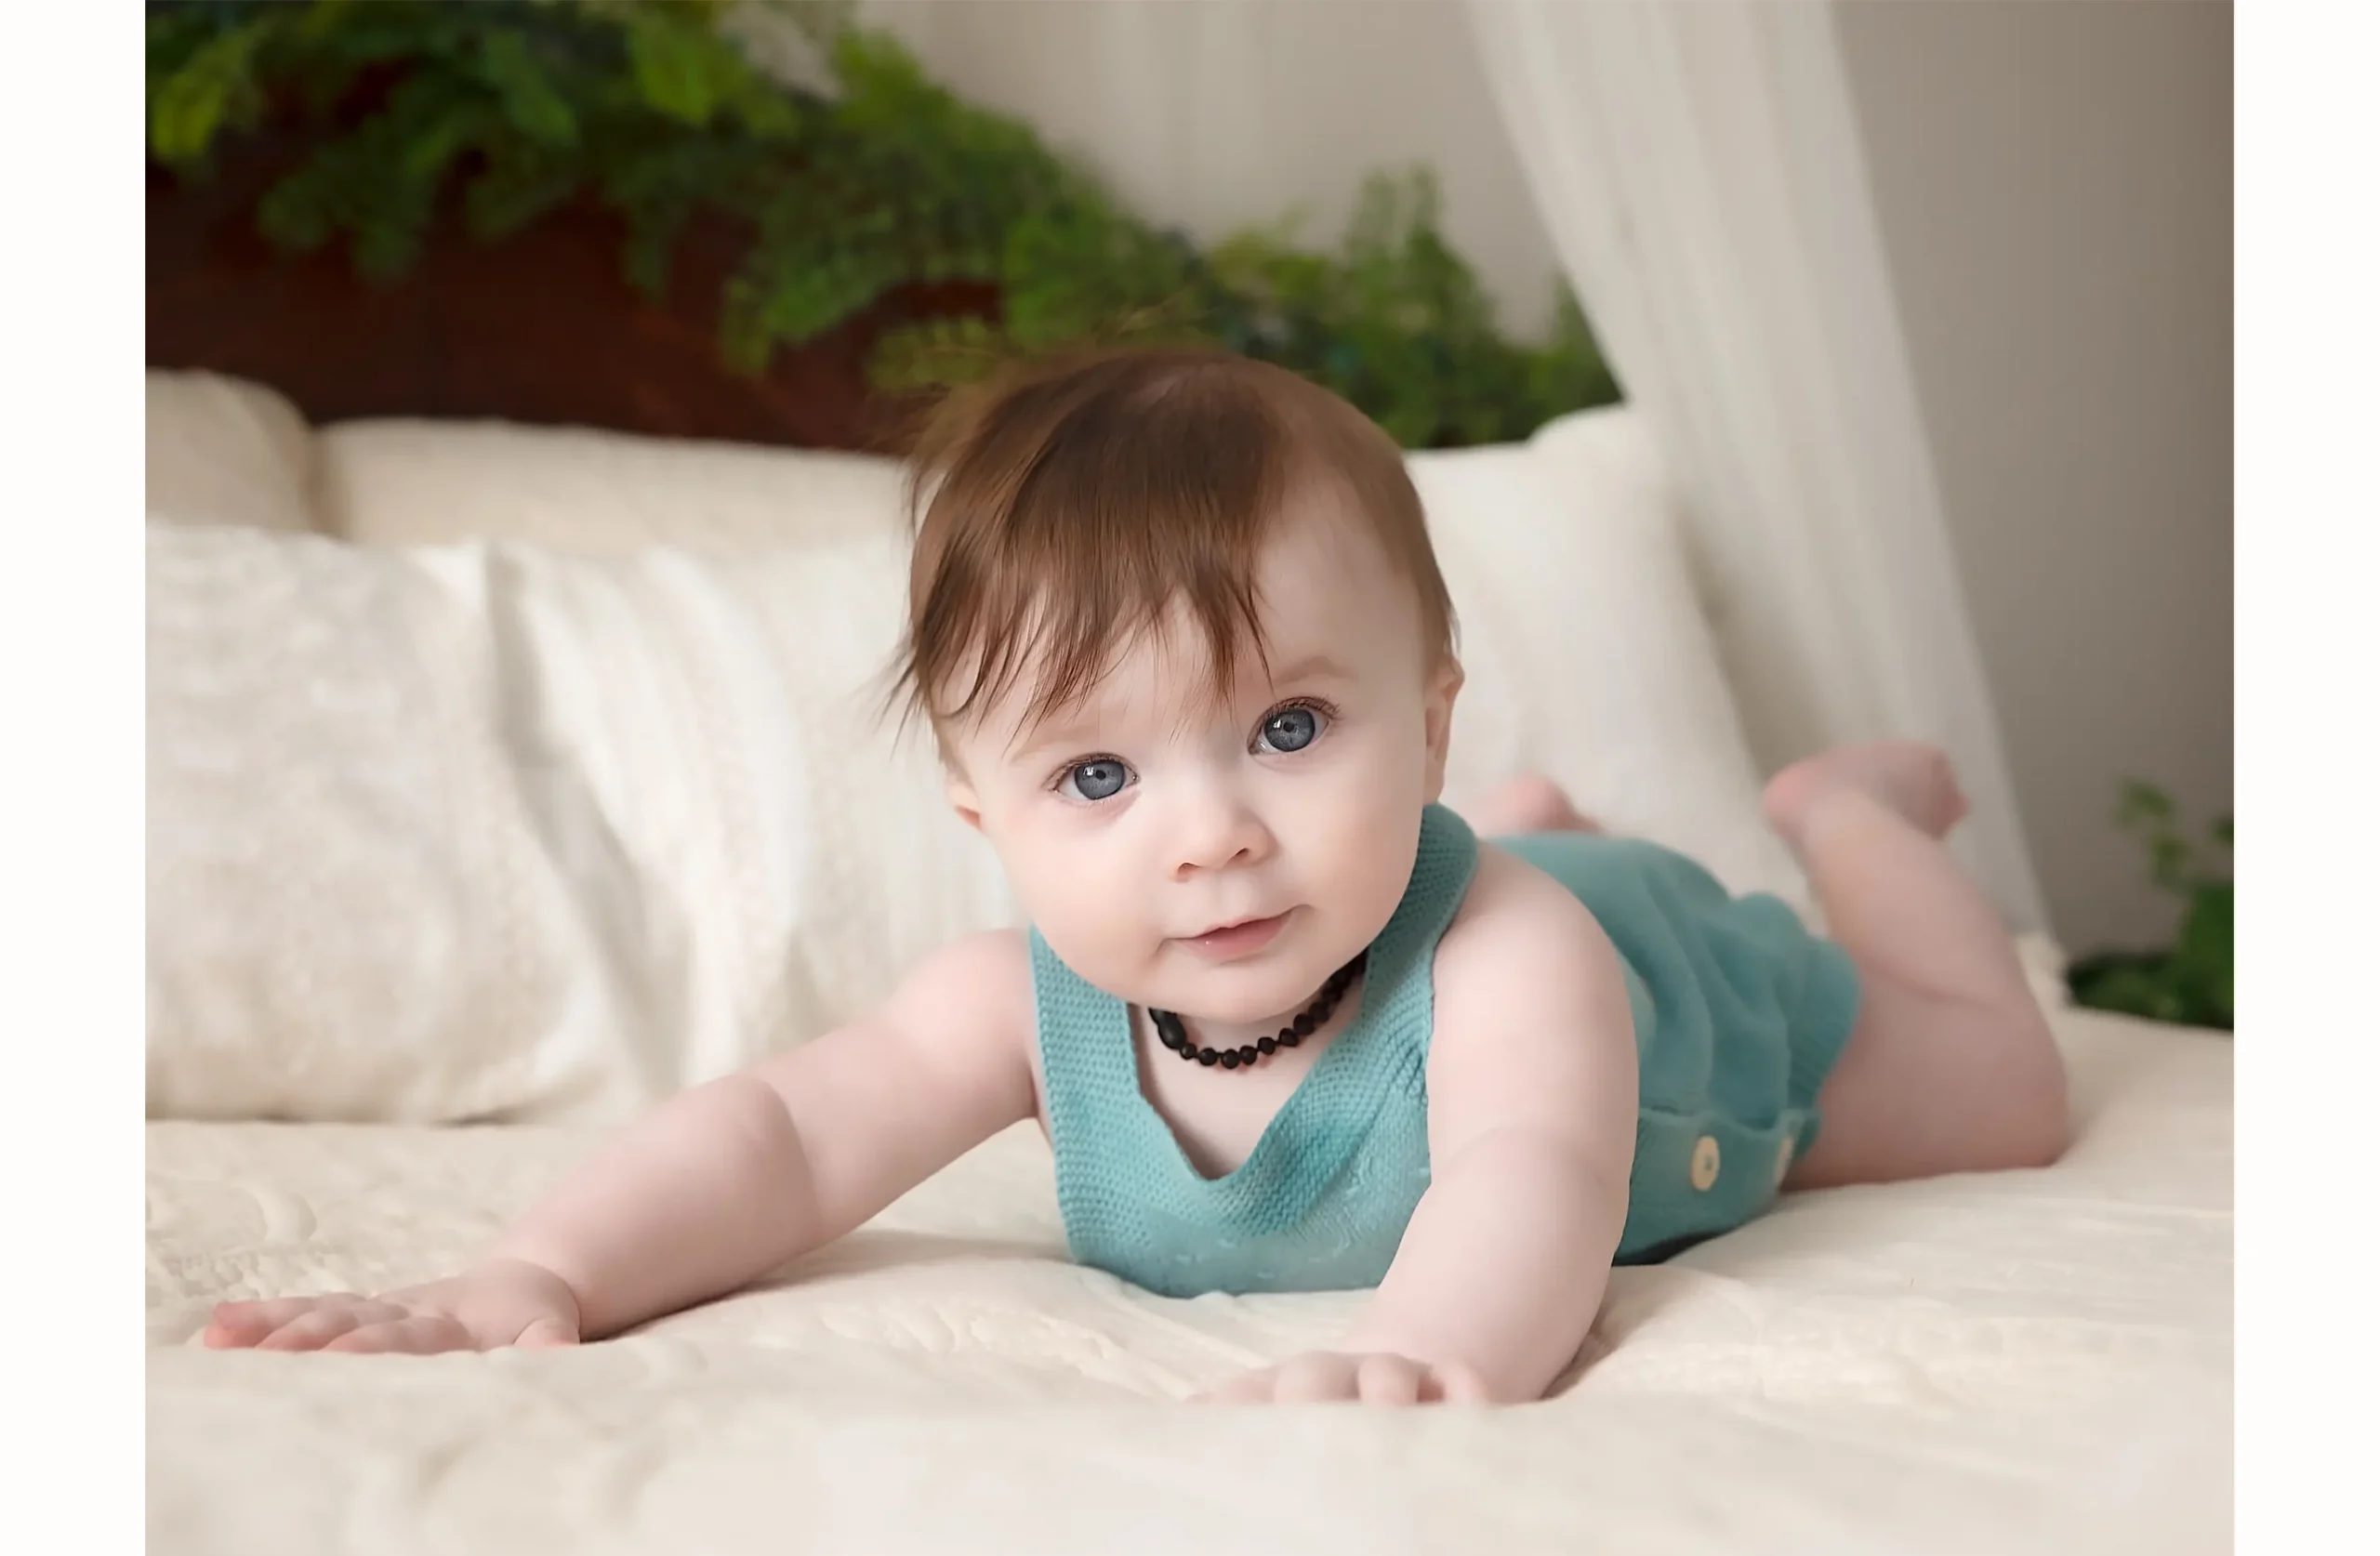 Infant laying on a bed